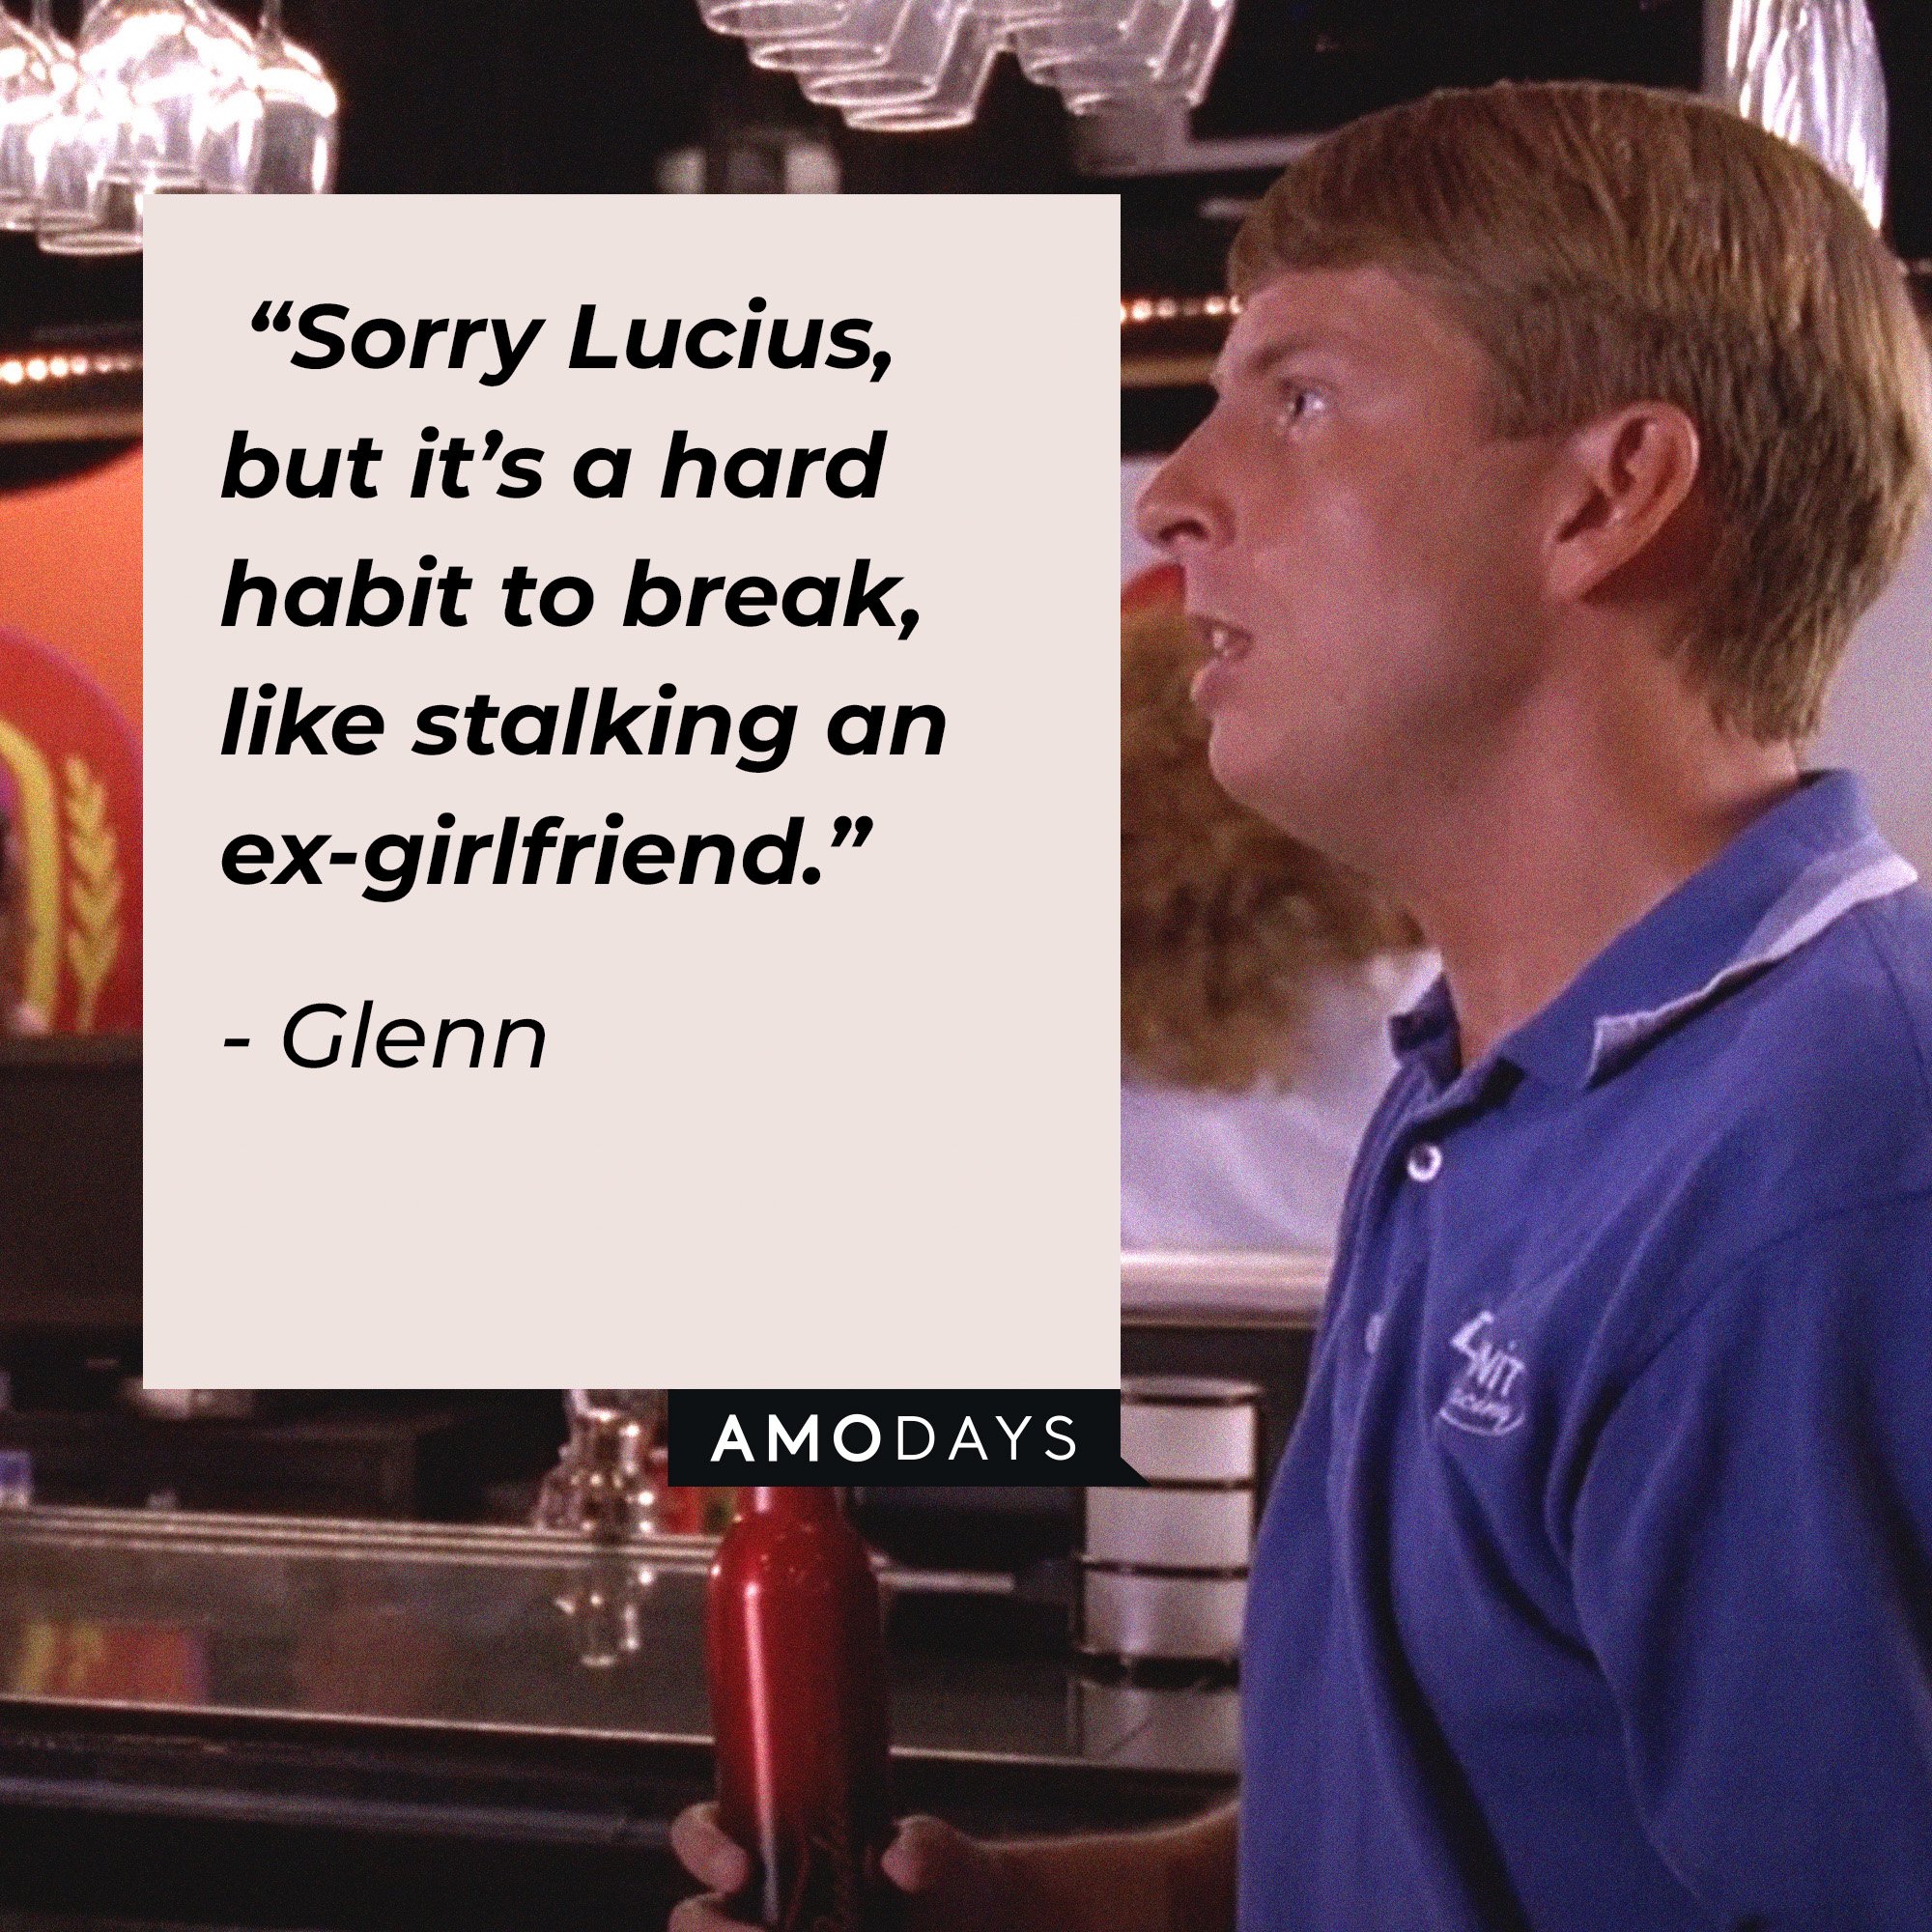 Glenn’s quote: “Sorry Lucius, but it’s a hard habit to break, like stalking an ex-girlfriend.”  | Image: AmoDays